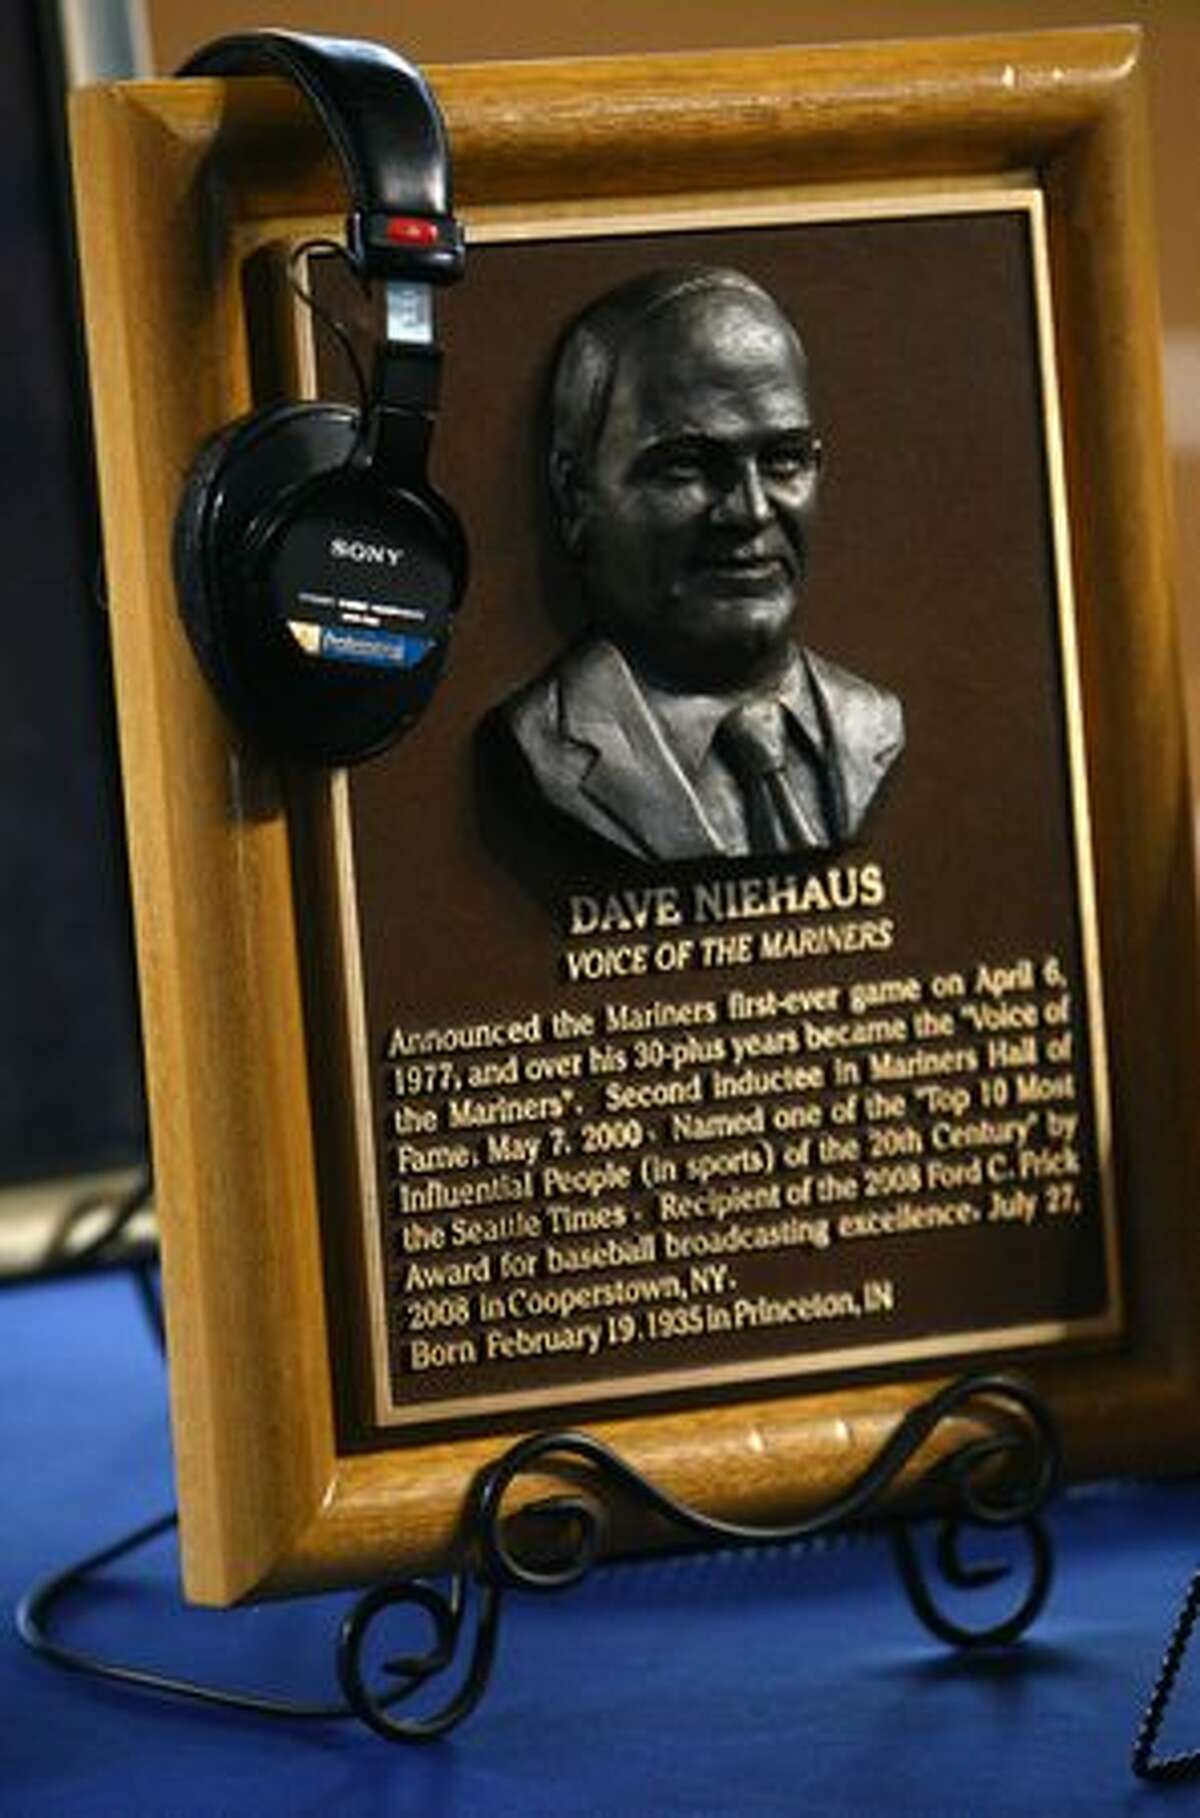 Dave Niehaus' headset rests on a plaque during a tribute for Niehaus on Saturday at Safeco Field in Seattle. Niehuas died earlier in the week from a heart attack. The popular play-by-play announcer was the voice of the Seattle Mariners since the team's inaugural season in 1977.